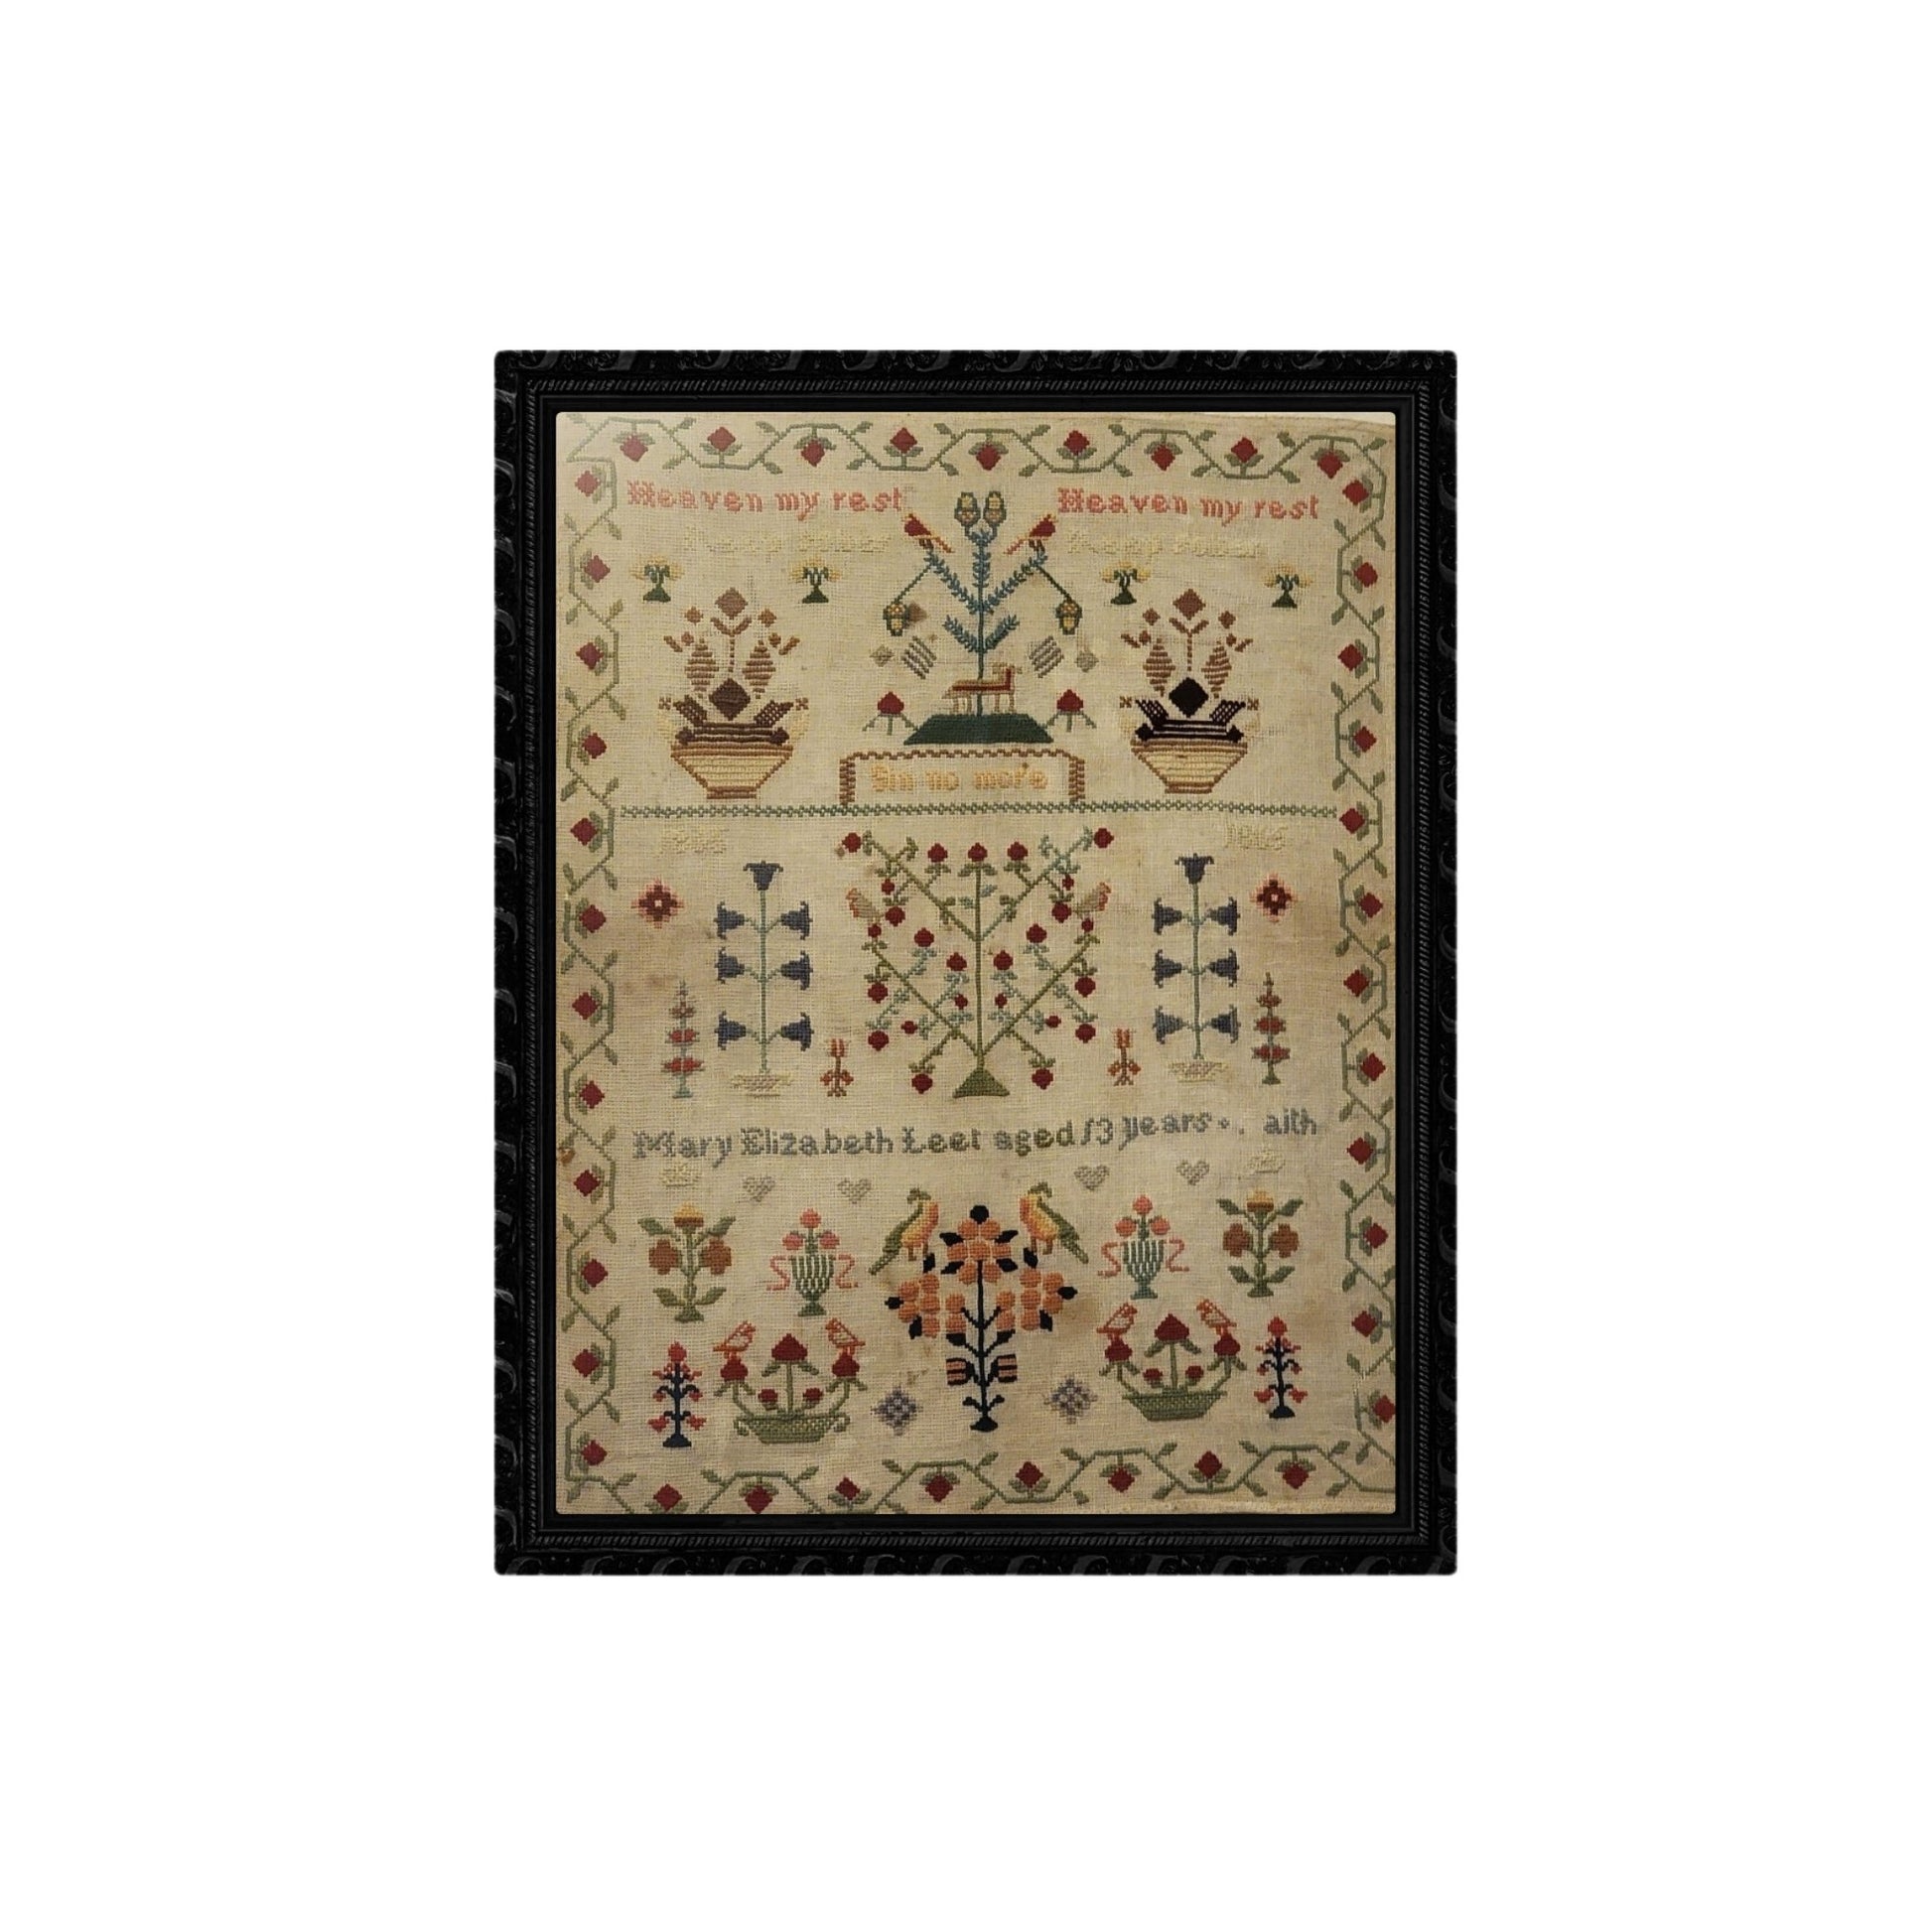 antique sampler stitched by Mary Elizabeth Leet in 1865 using wool on canvas